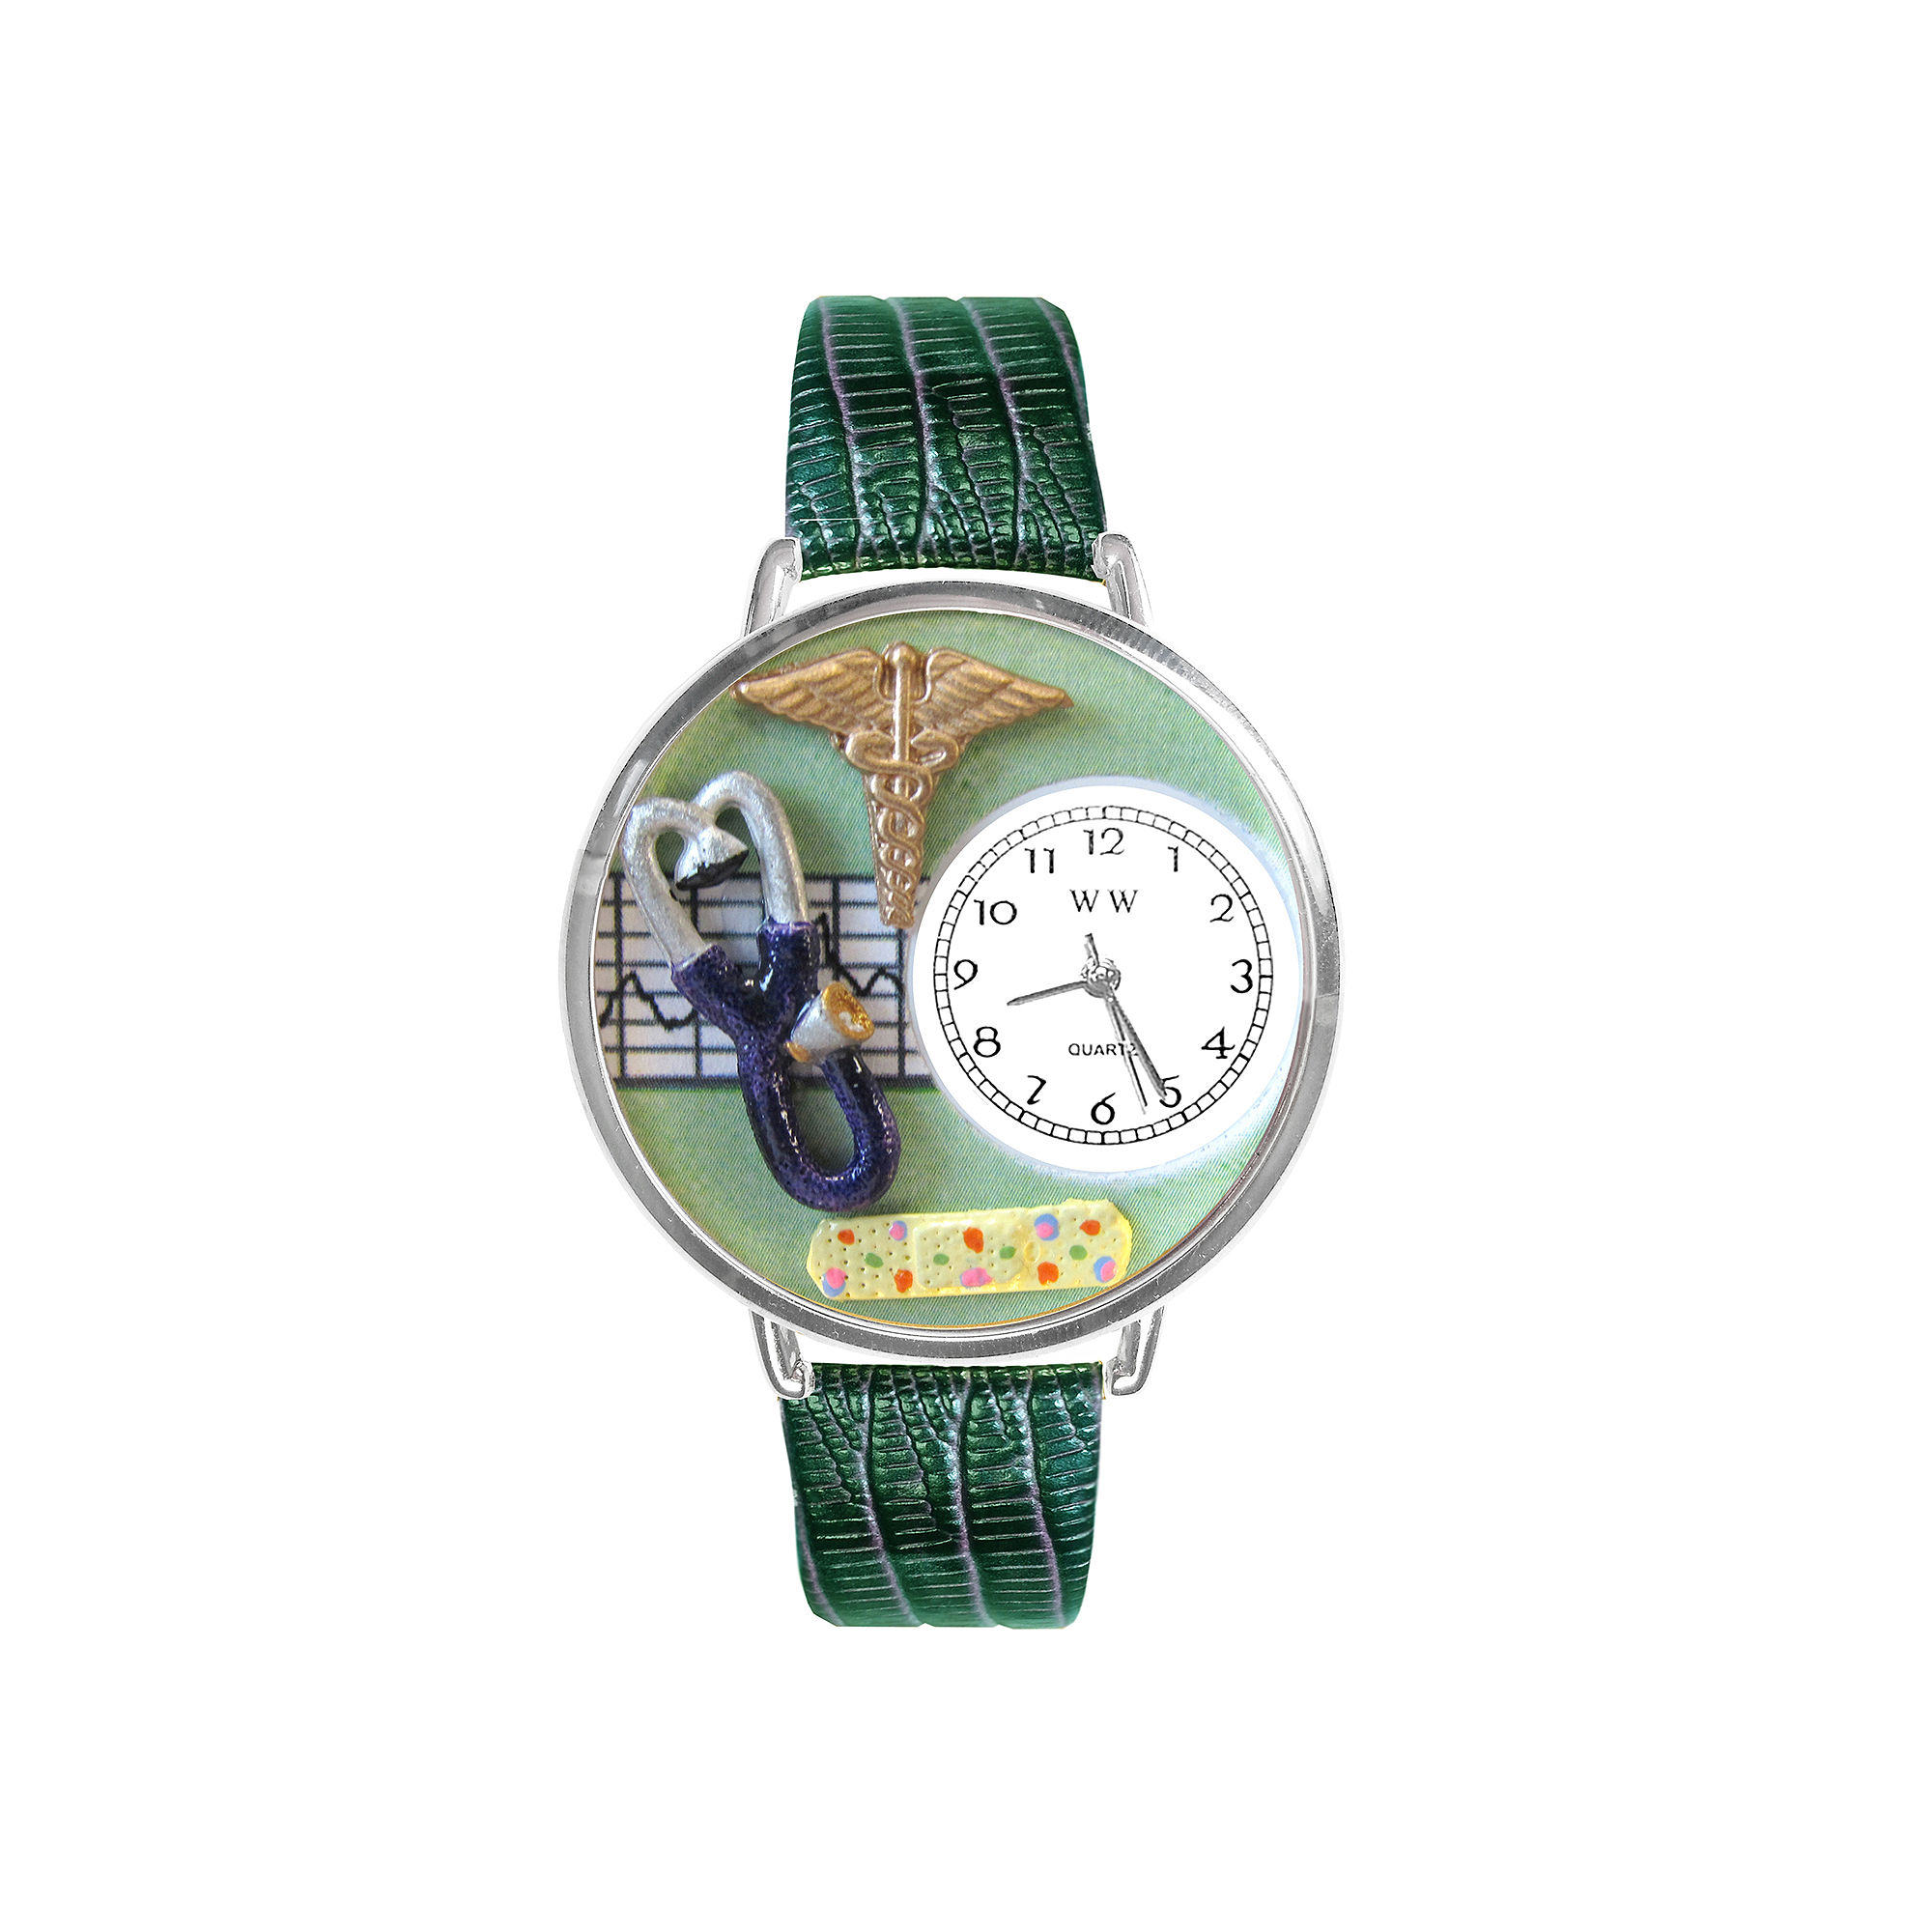 Whimsical Watches Personalized Nurse Womens Silver-Tone Bezel Green Leather Strap Watch